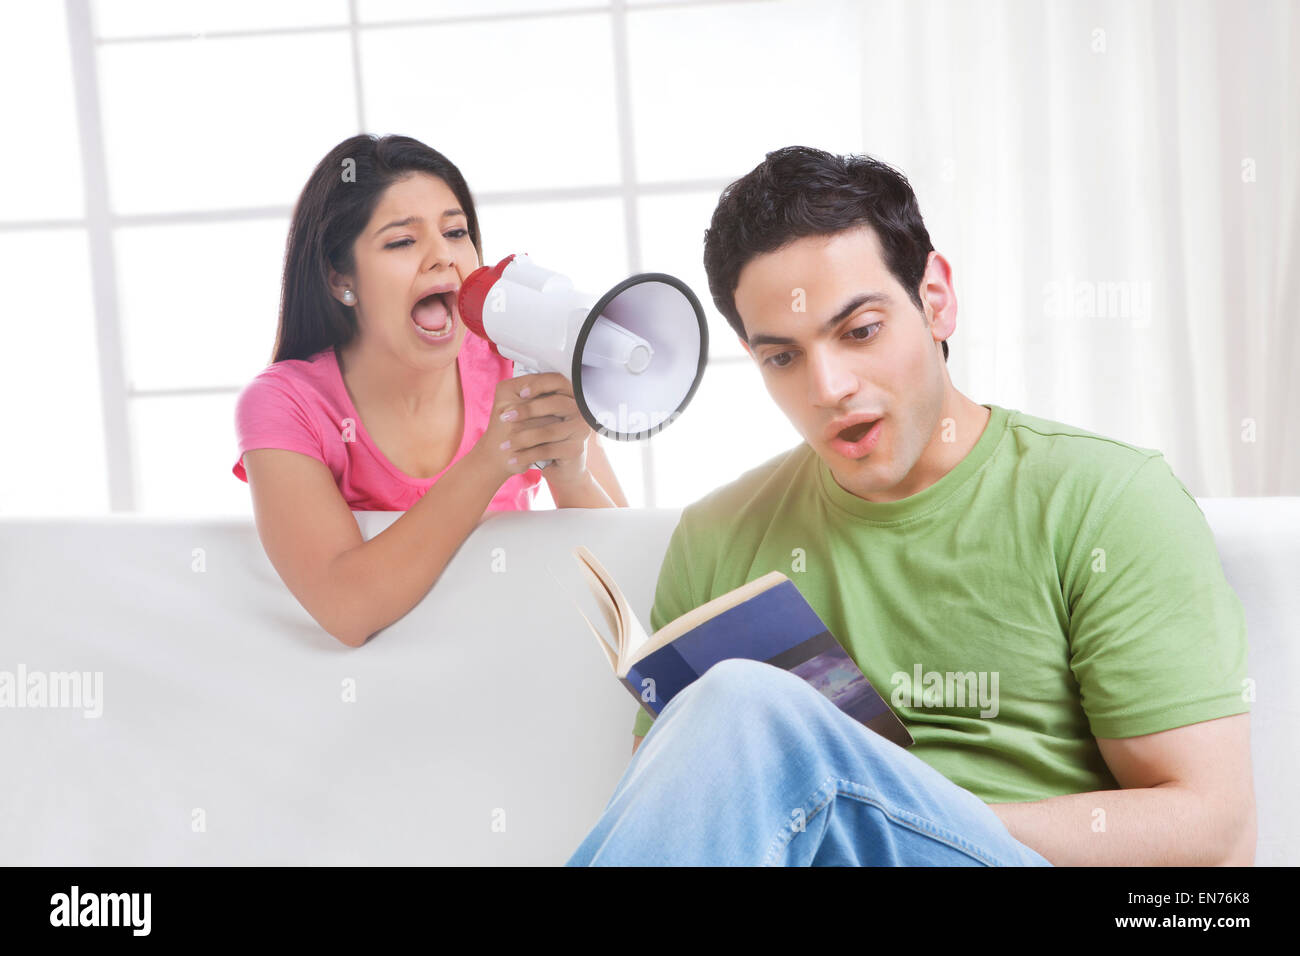 Young man reading while young woman is screaming into a megaphone Stock Photo